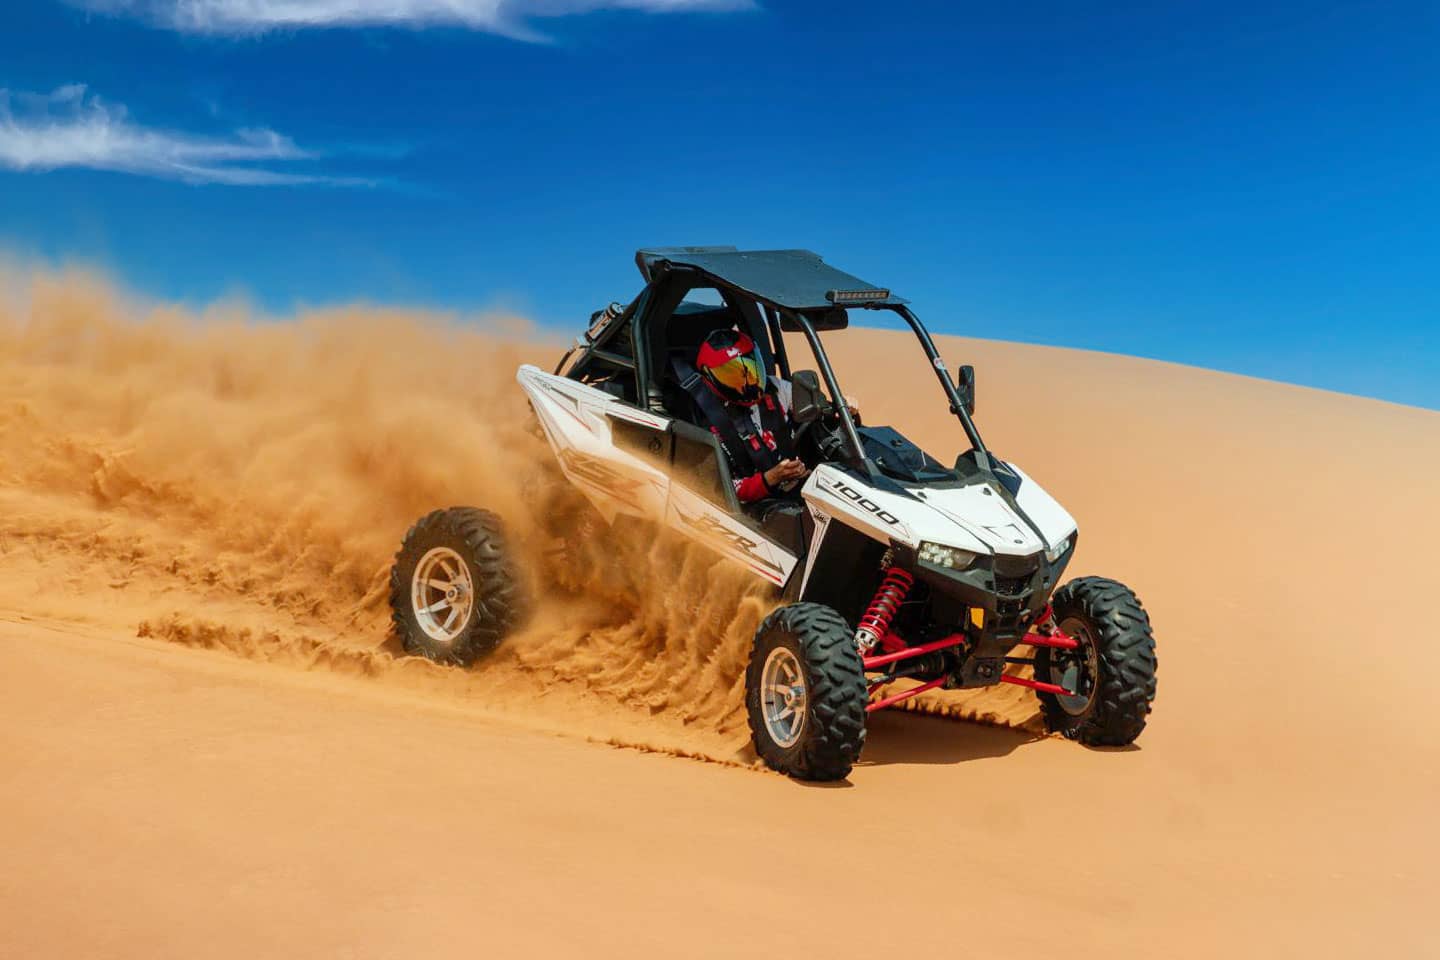 How to rent a Buggy in Dubai? The Best and Powerful Polaris Buggy